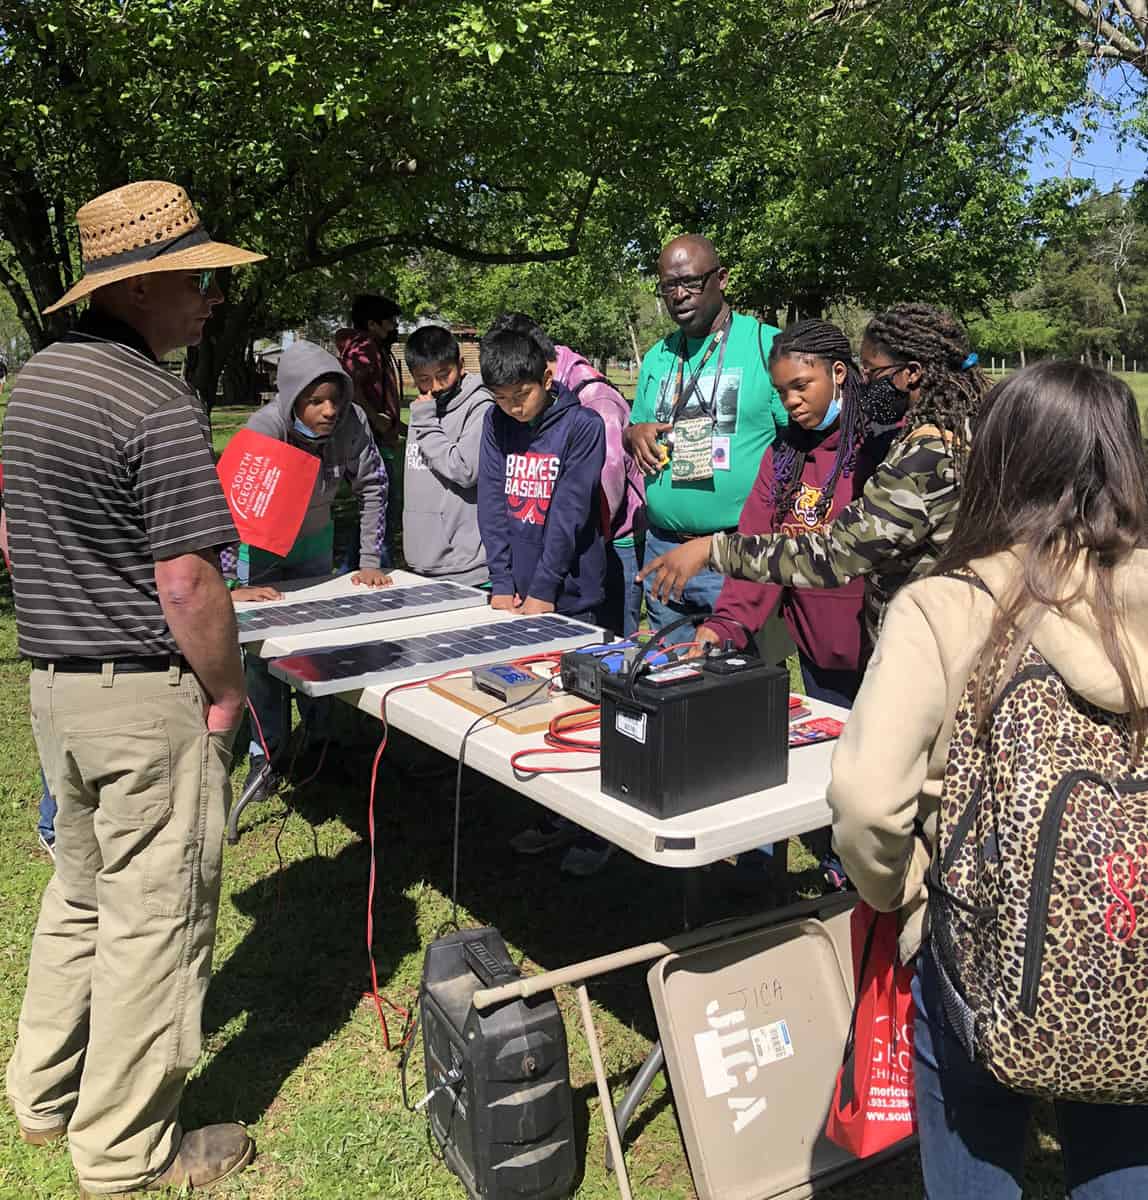 SGTC Industrial Electrical Instructor Patrick Owen did a simulation for the students with solar panels and showed them how electricity could be generator from the sun.